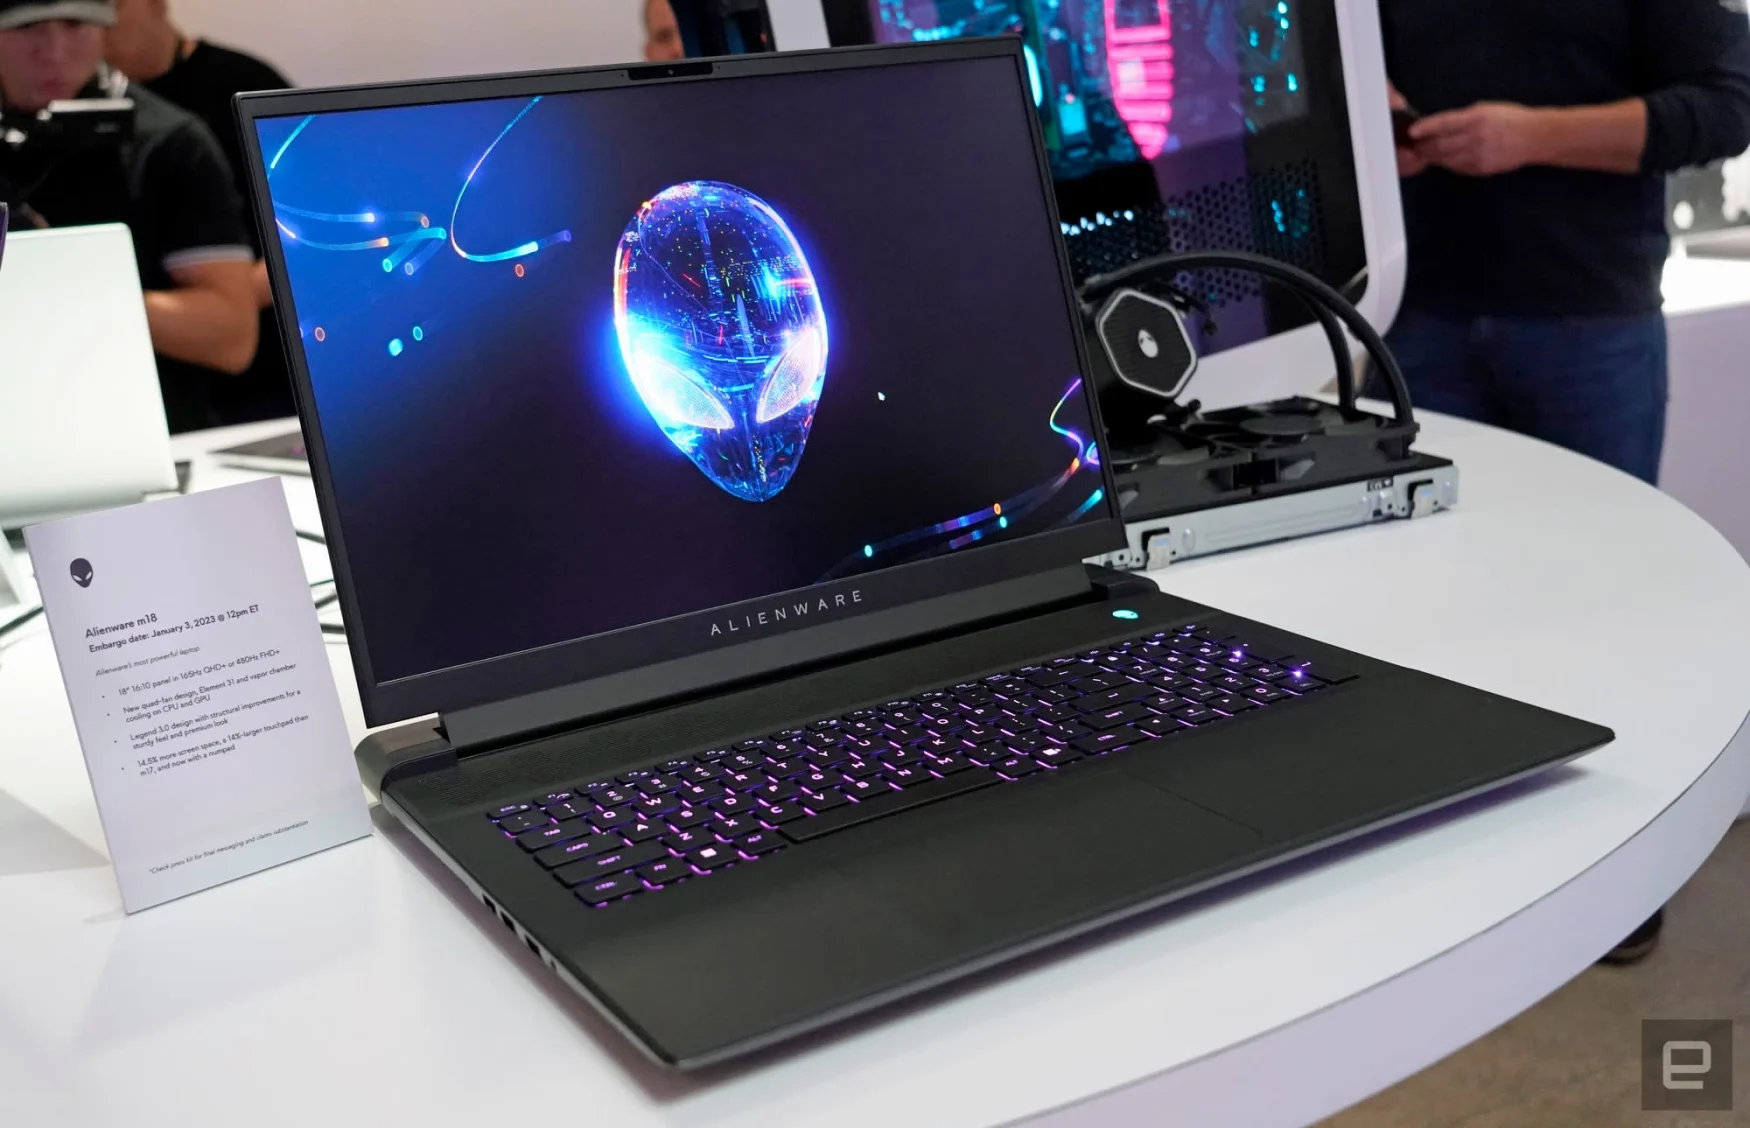 CES showroom photo of the Alienware m18 laptop. The dark-colored laptop sits on a white table with an alien logo on its screen.